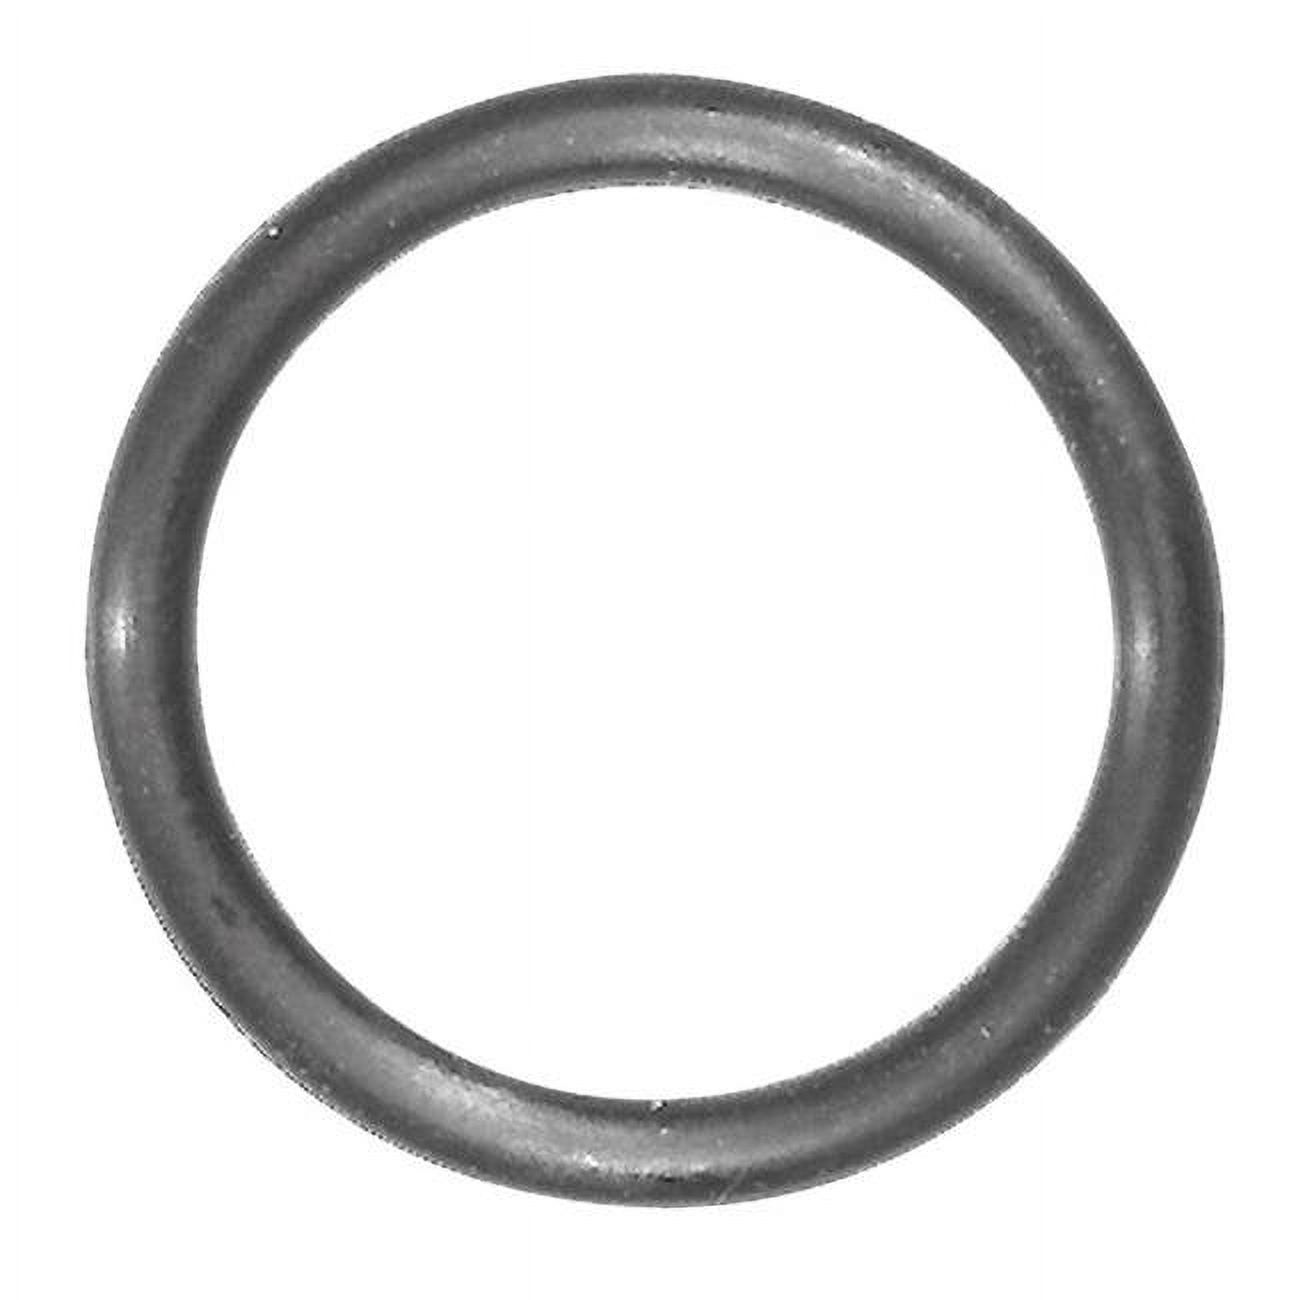 35771b 1 X 0.8 X 0.09 In. O-ring Faucet- Pack Of 5